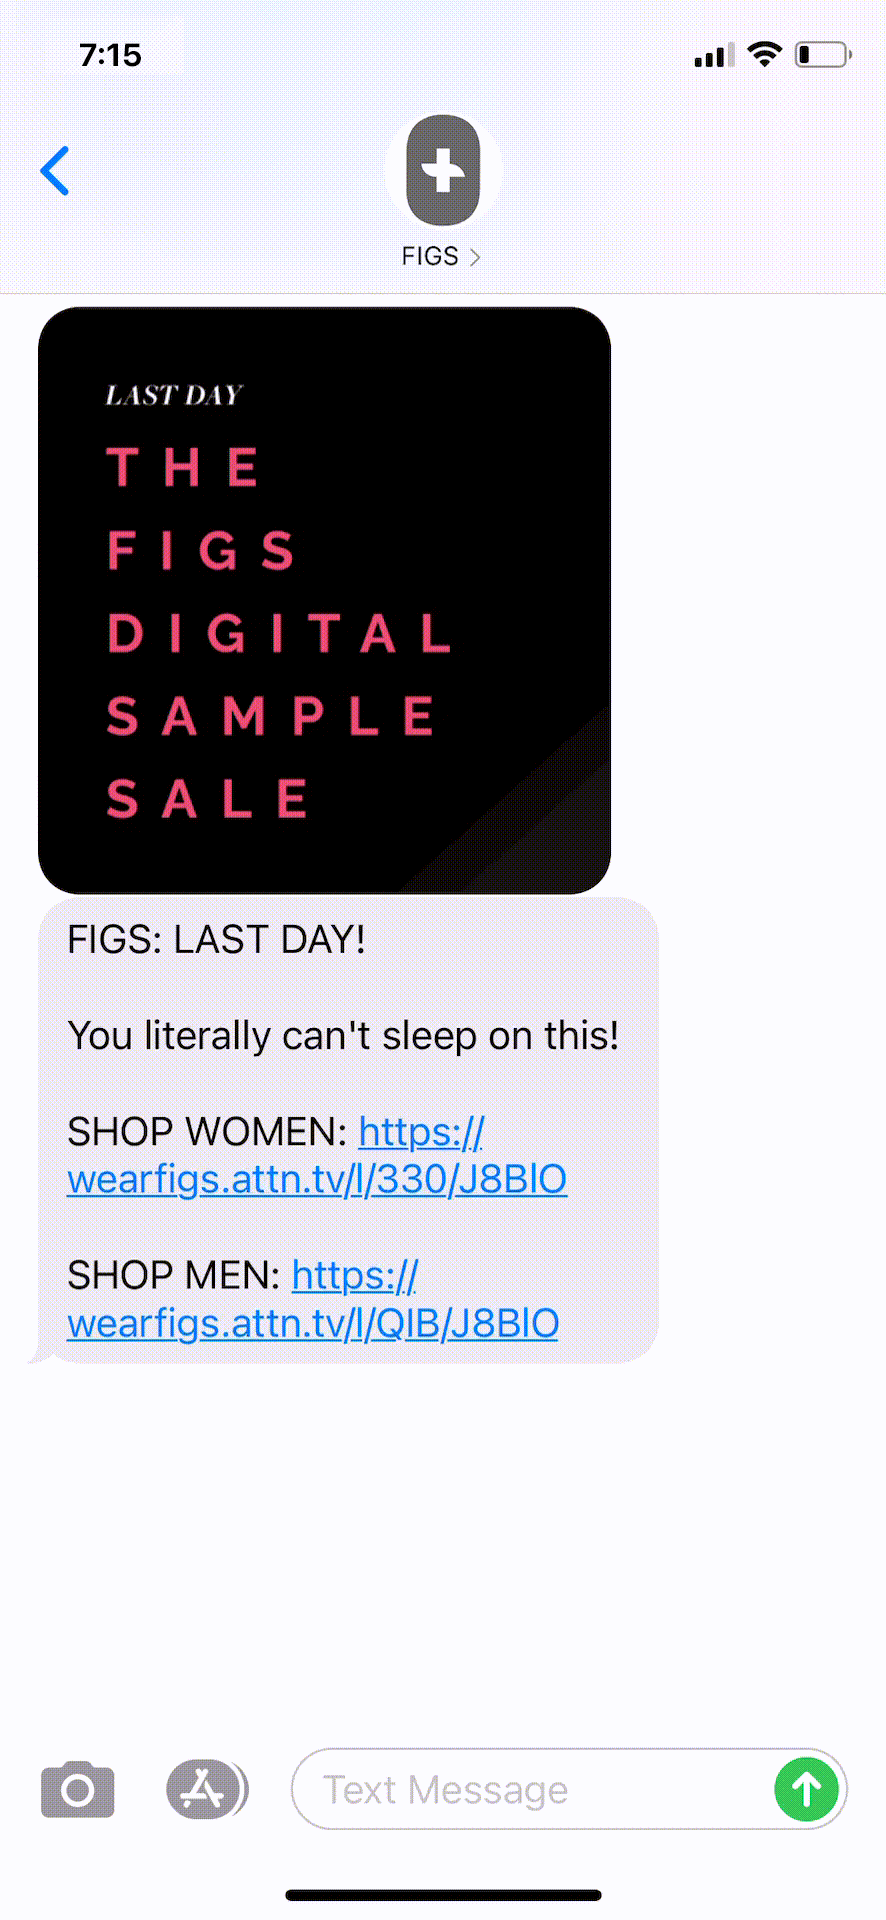 FIGS-Text-Message-Marketing-Example-03.27.2021